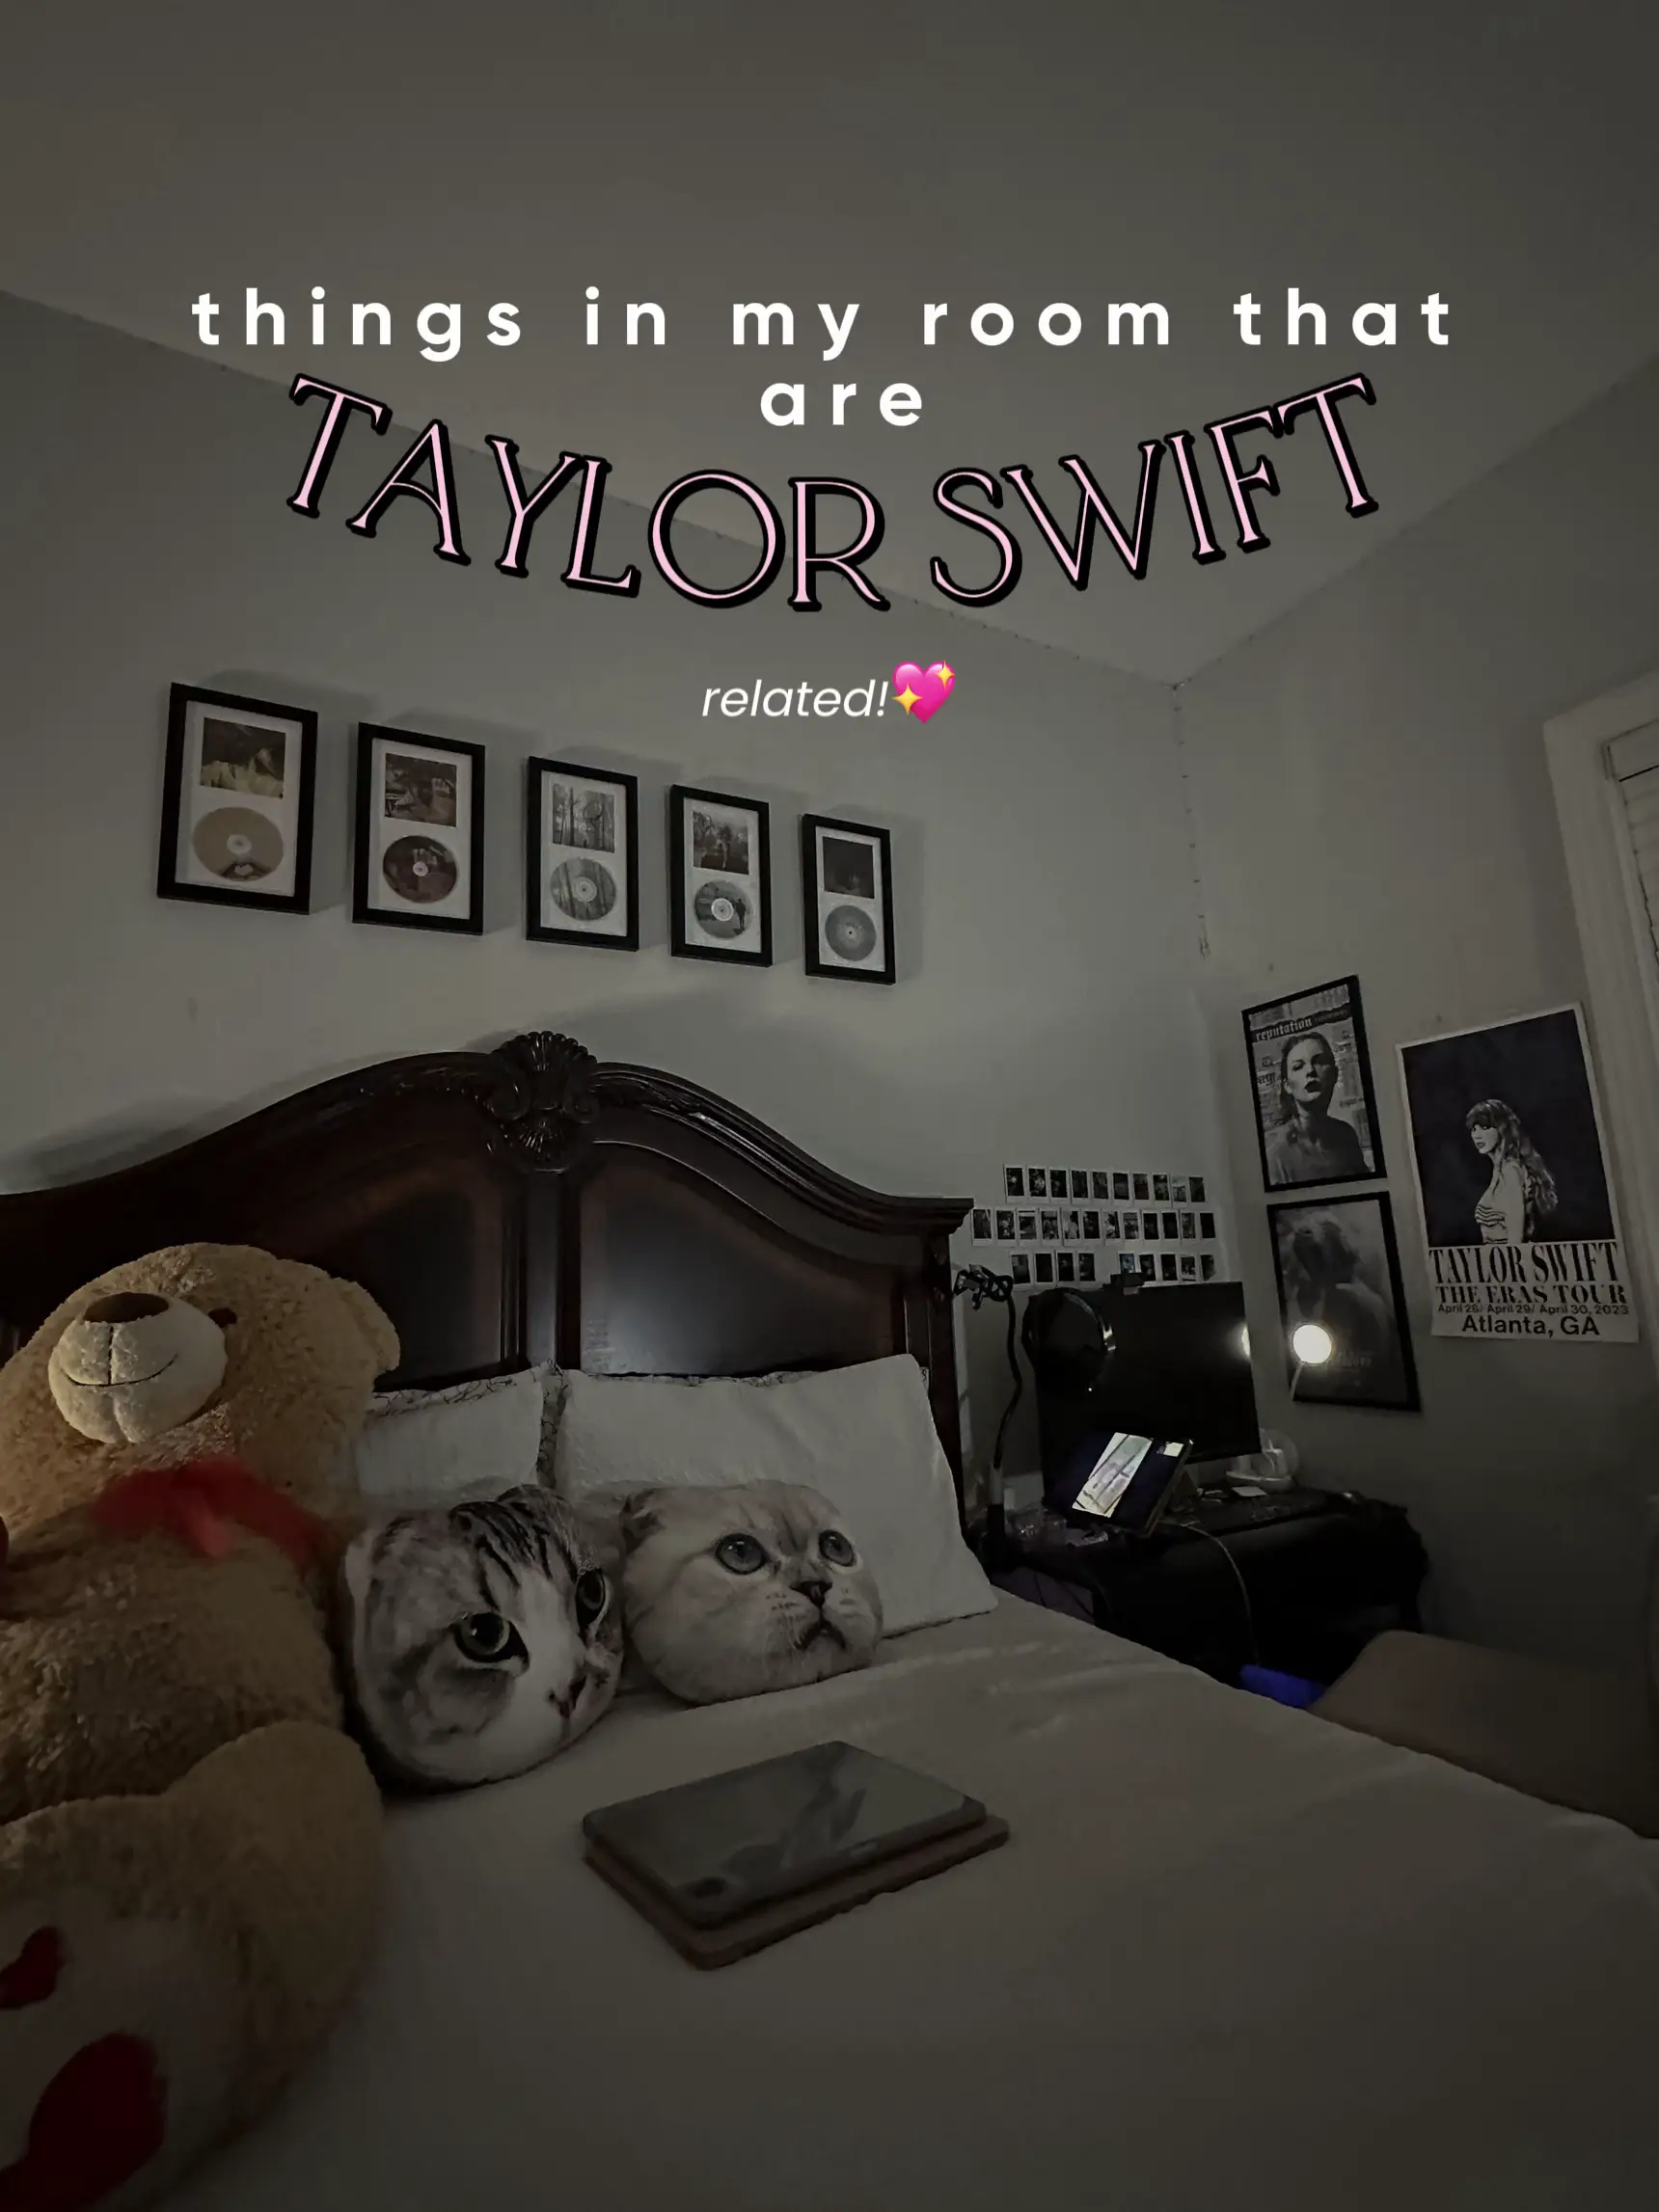 TAYLOR SWIFT THINGS IN MY ROOM THAT MAKE SENSE